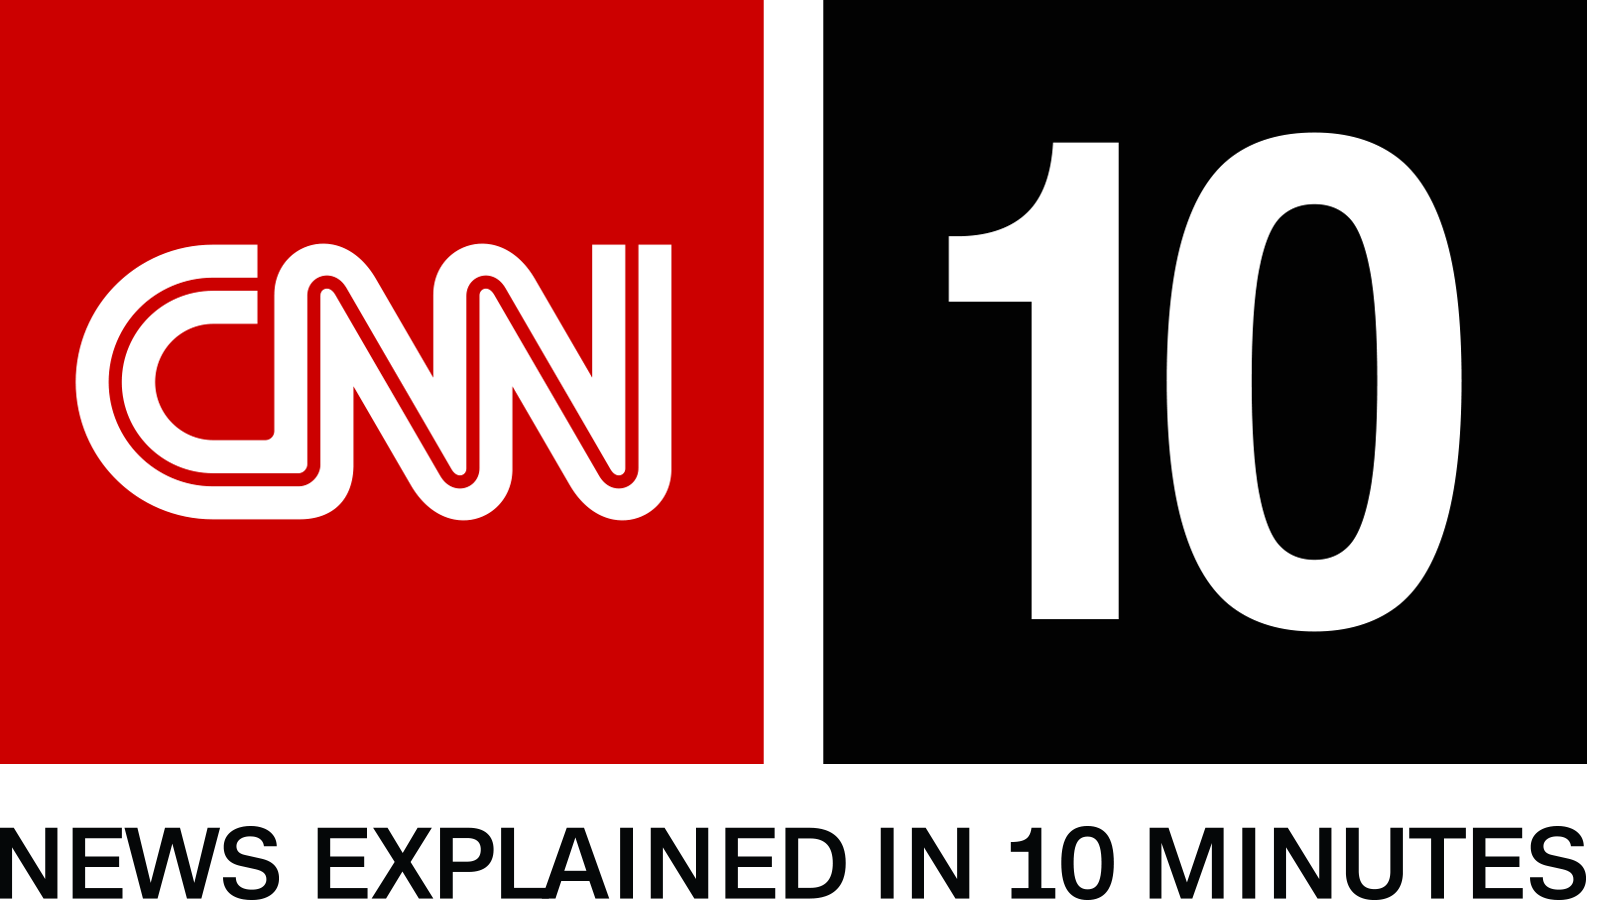 Five Reasons Cnn Videos Are Great Tools For Teaching Current Events